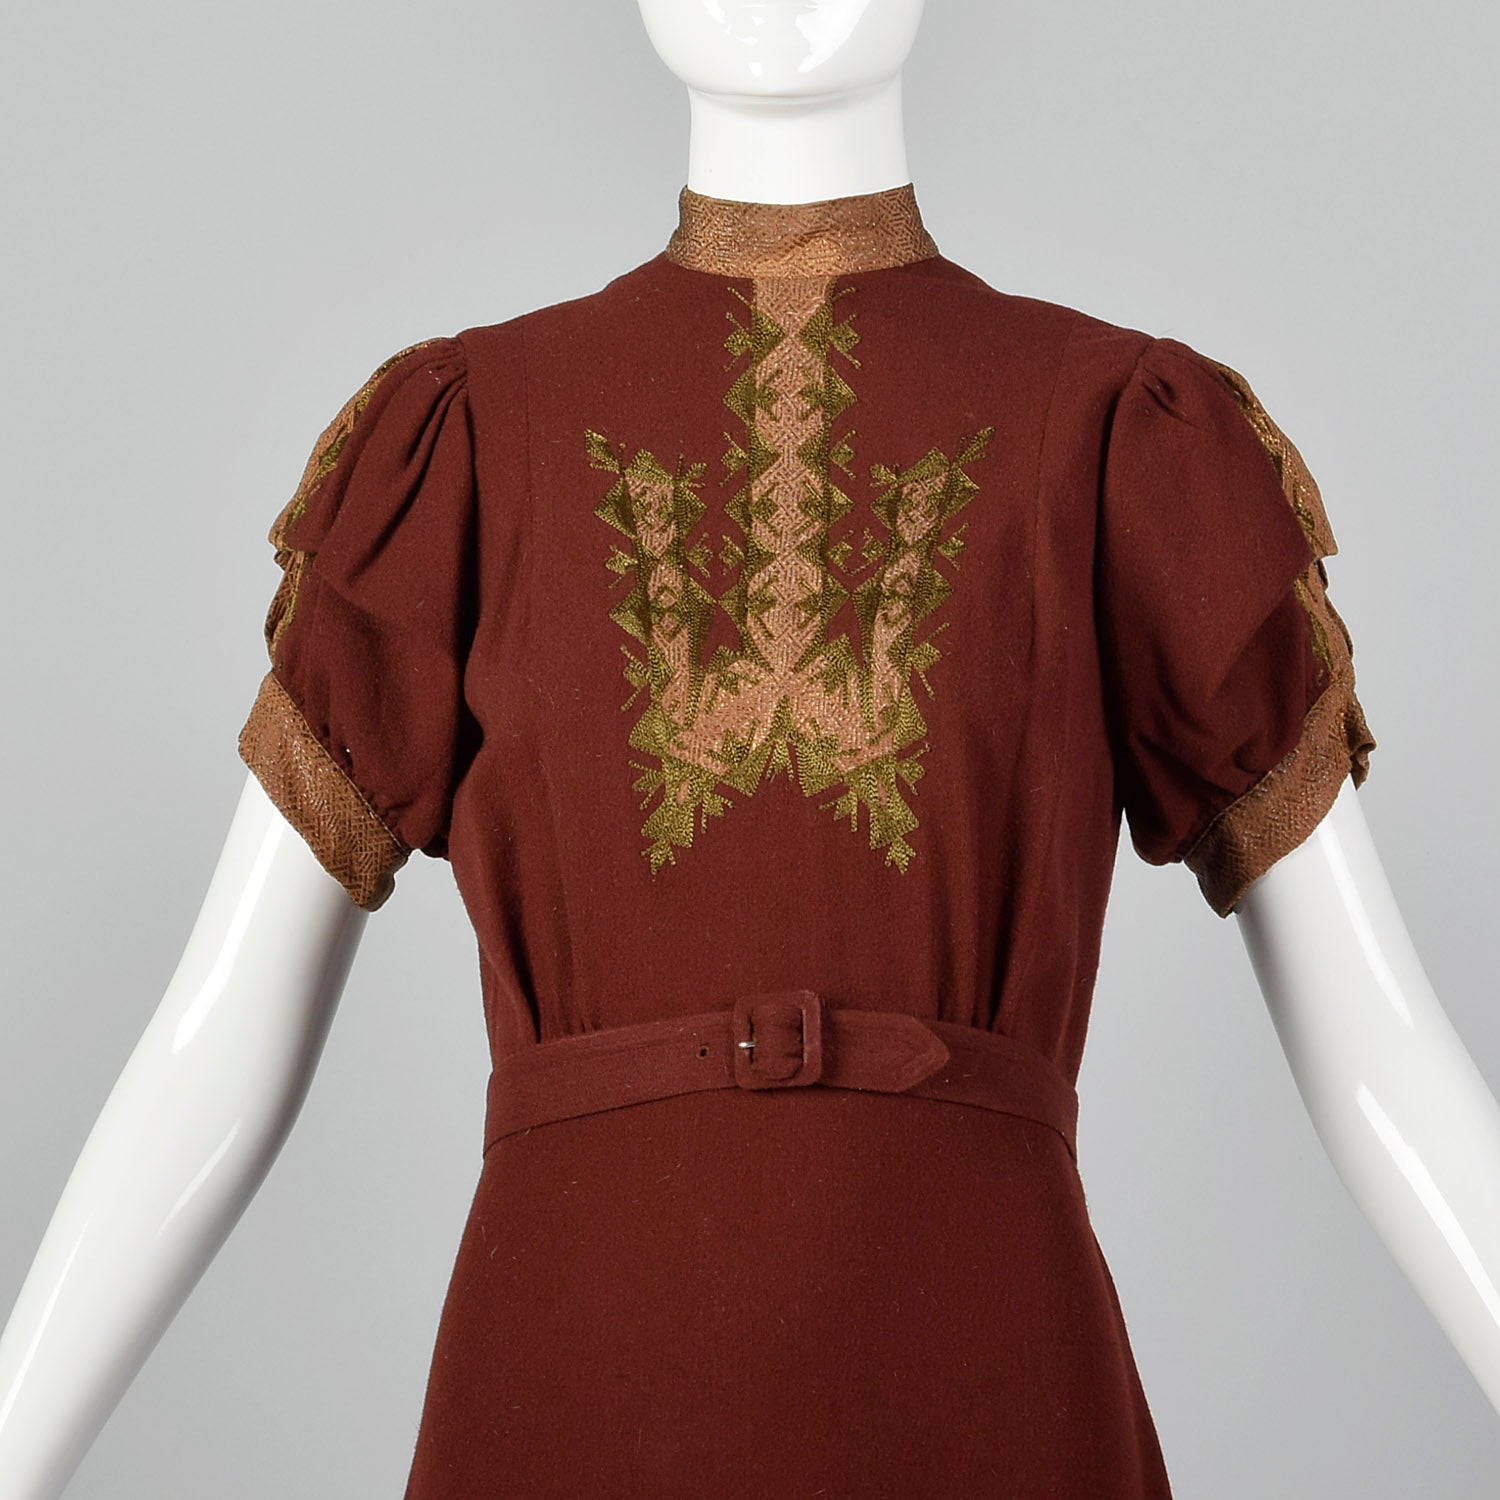 Small 1930s Wool Dress with Lamé and Embroidery